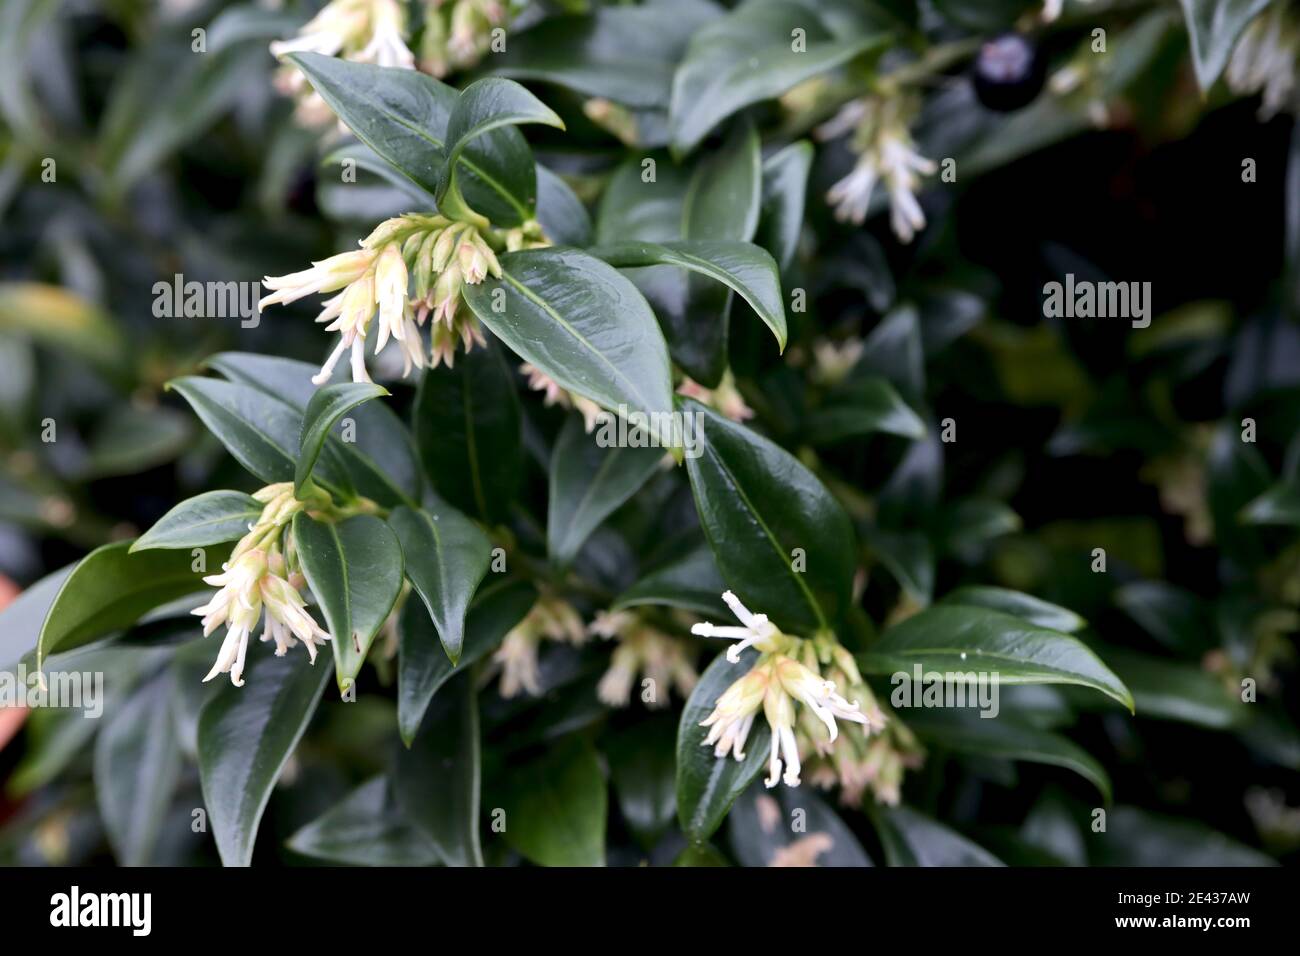 Sarcococca confusa Sweet box – highly scented thin white tubular flowers with dark green glossy foliage, January, England, UK Stock Photo